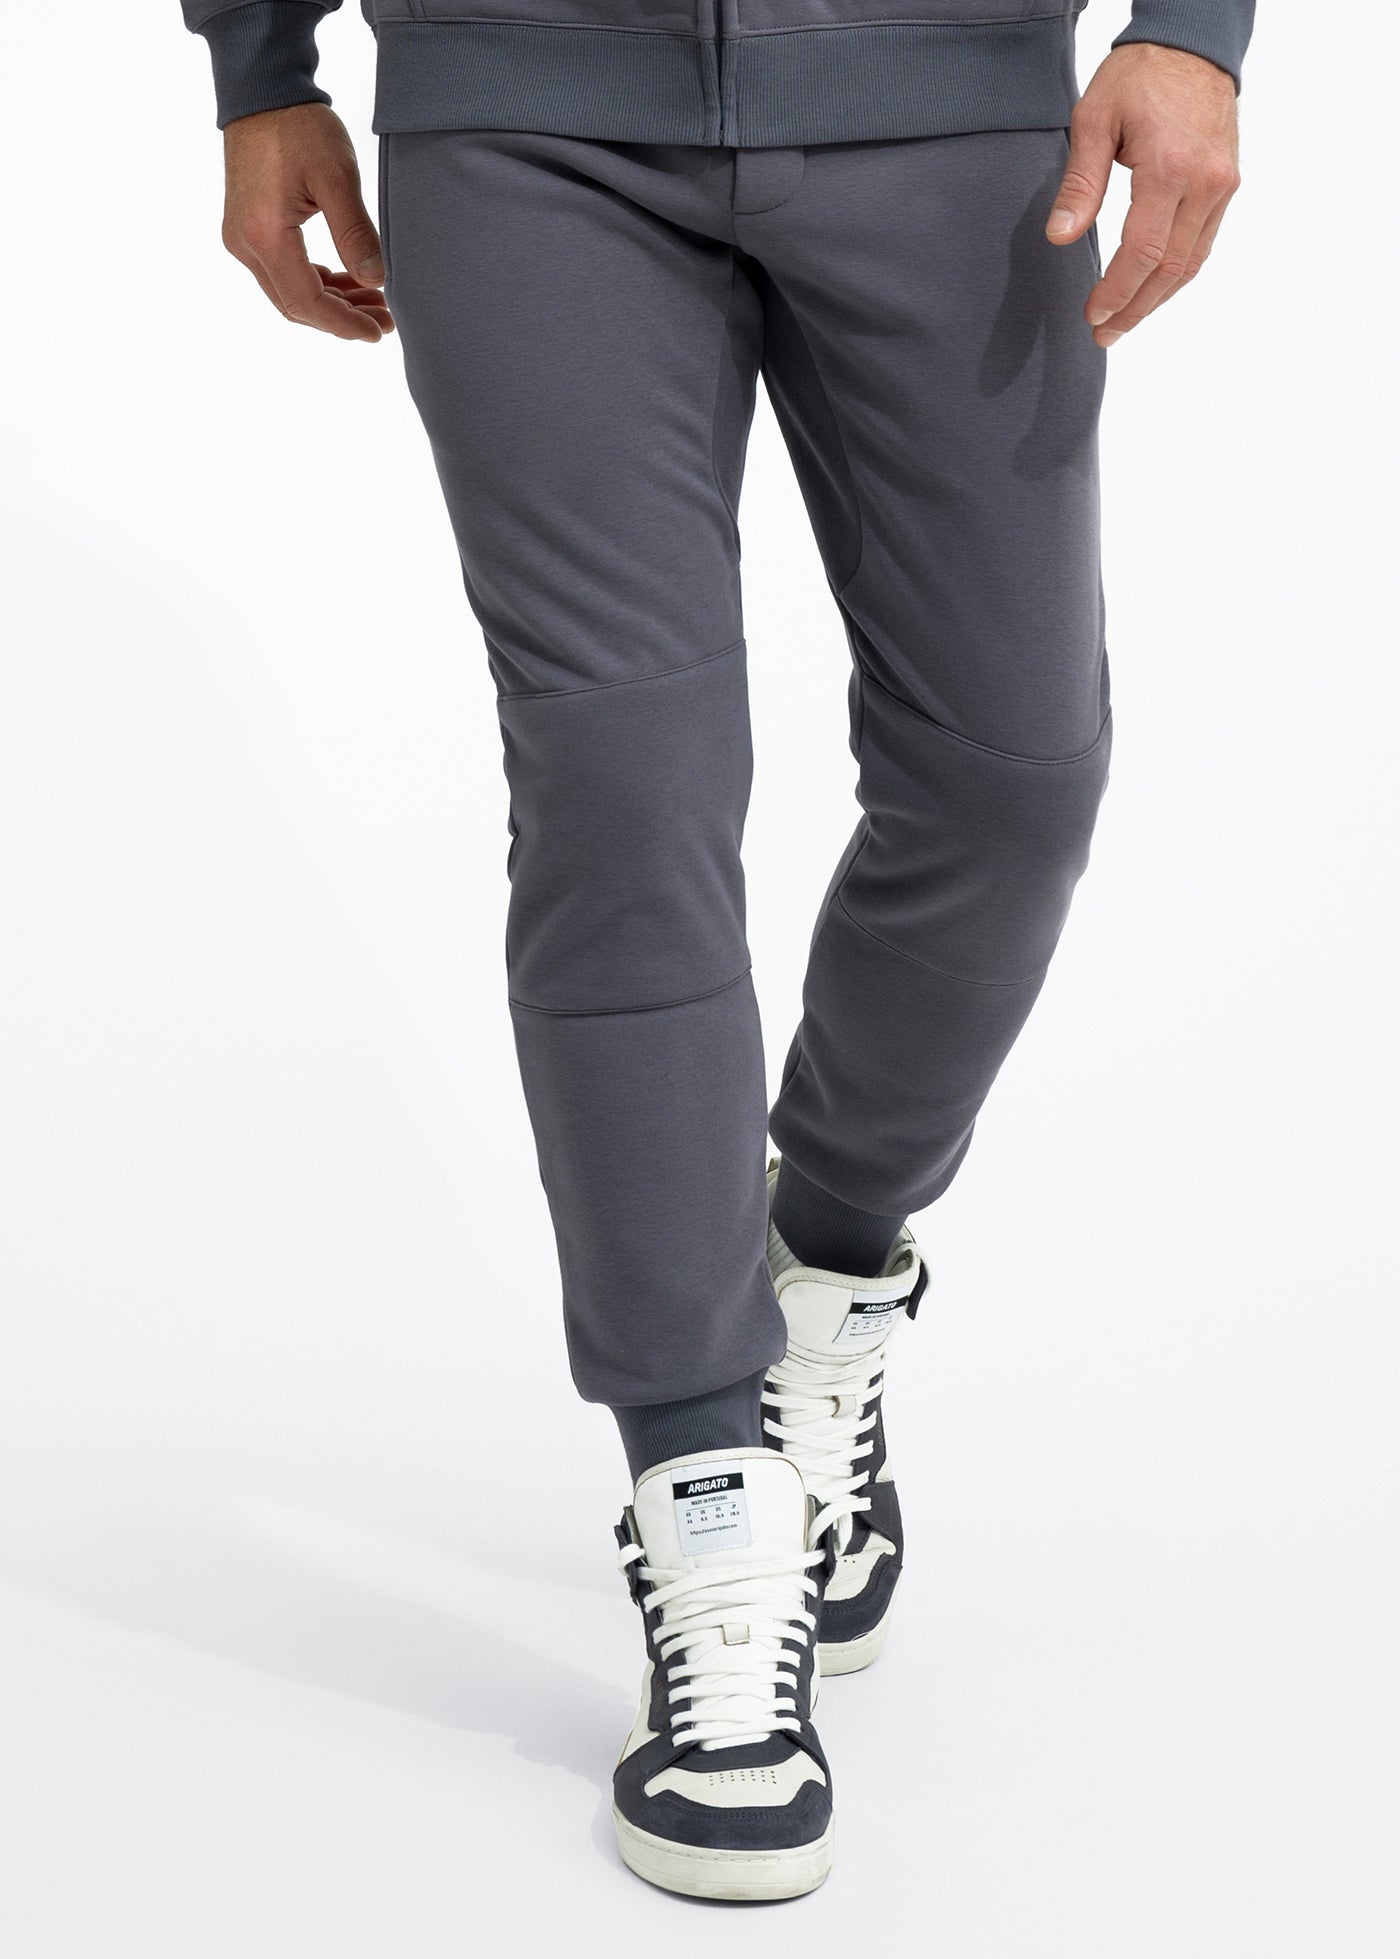 Gear Review: Men's Fremont Stretch Fleece Jogger from Stio - Unofficial  Networks